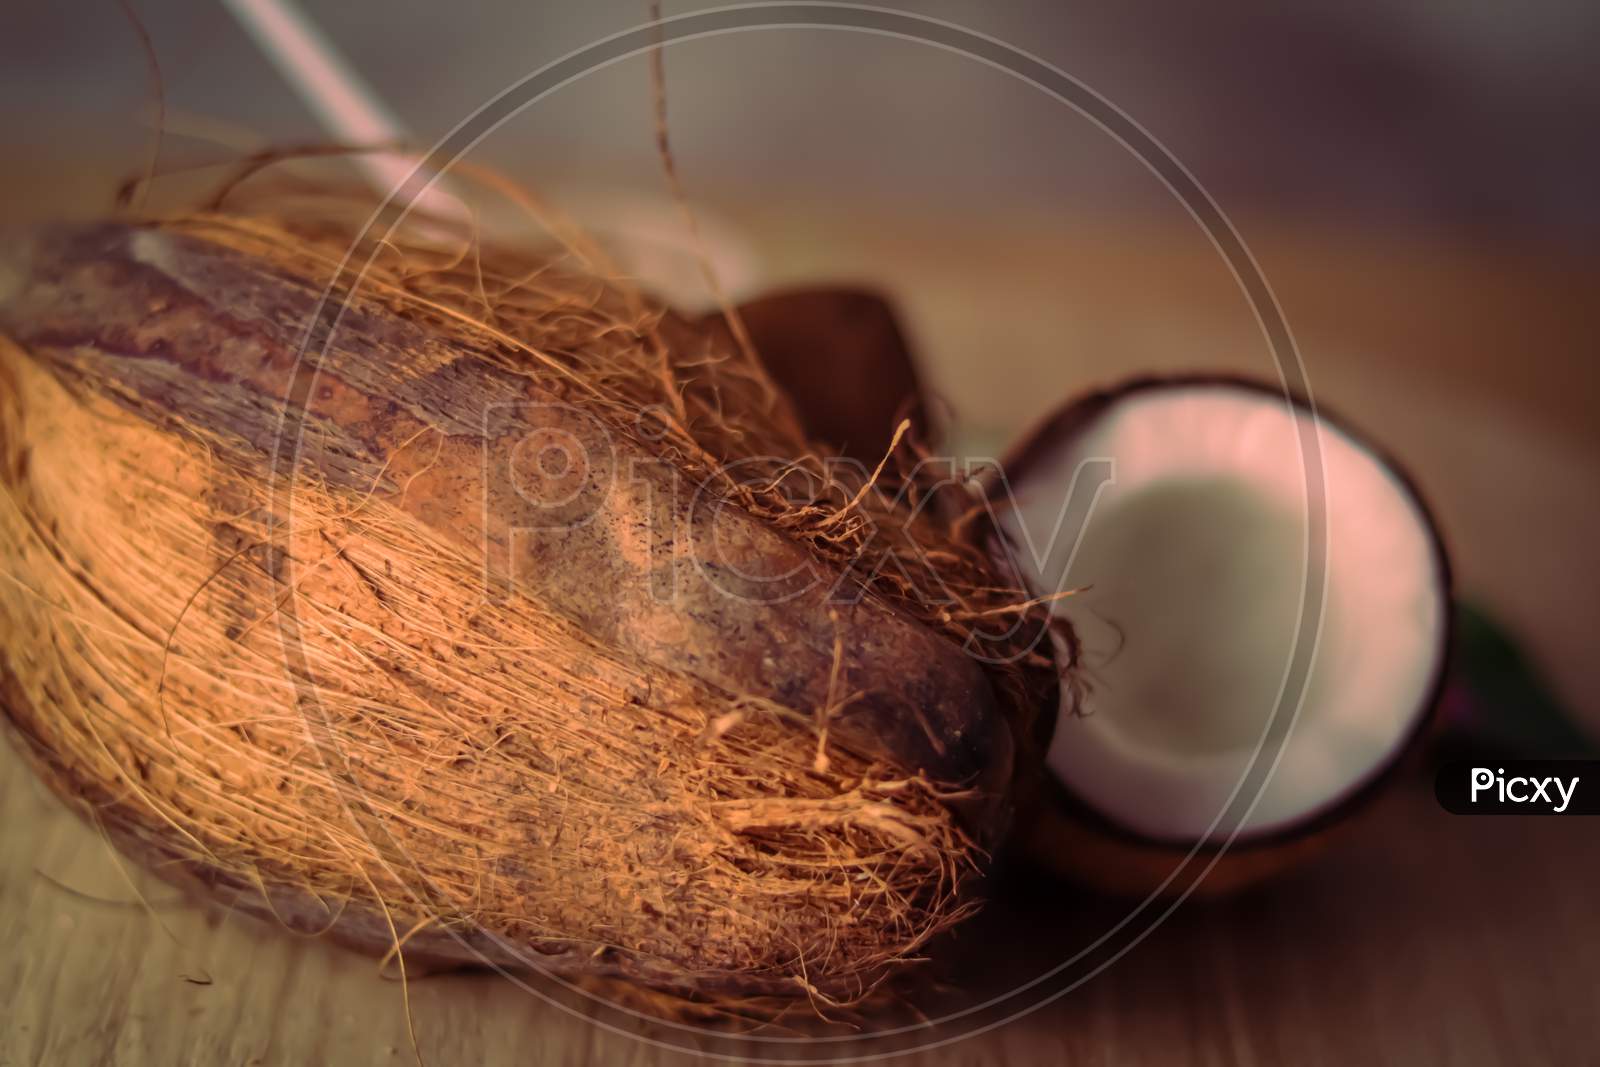 Healthy Coconut Milk With Whole Nut, Whole Coconut And Coconut Milk With Coconut Powder On Wooden Table,Fresh Nariyal Hd Footage ,Selective Focus On Subject,